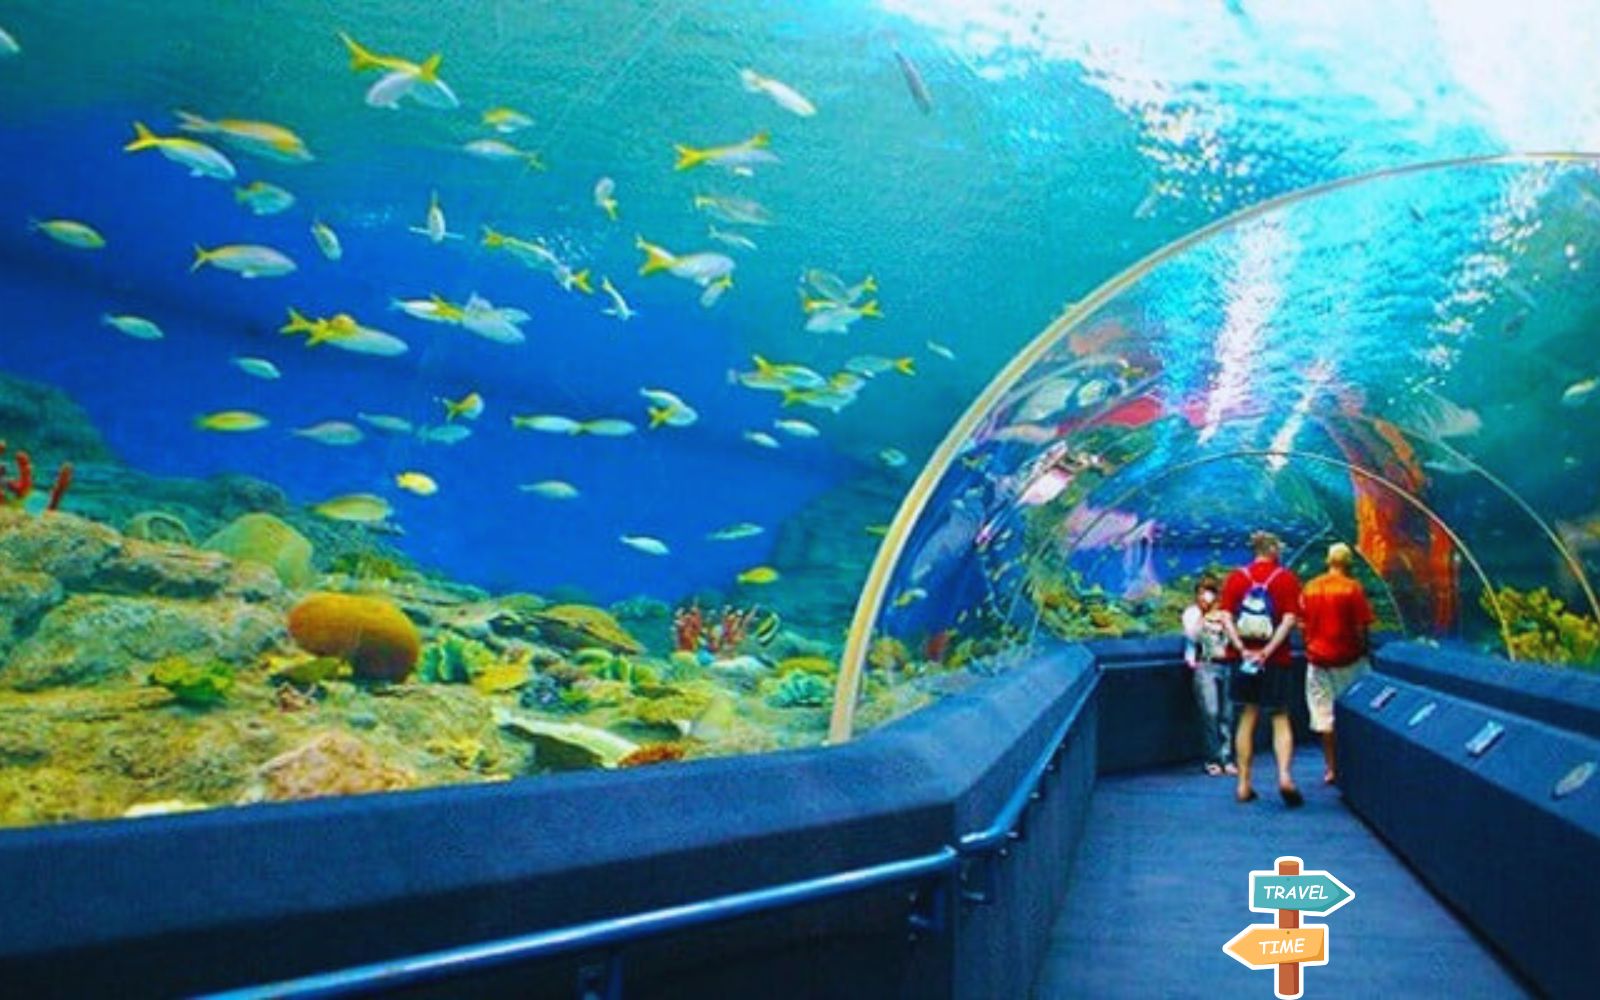 Share experiences of visiting Nha Trang Institute of Oceanography in DETAILS